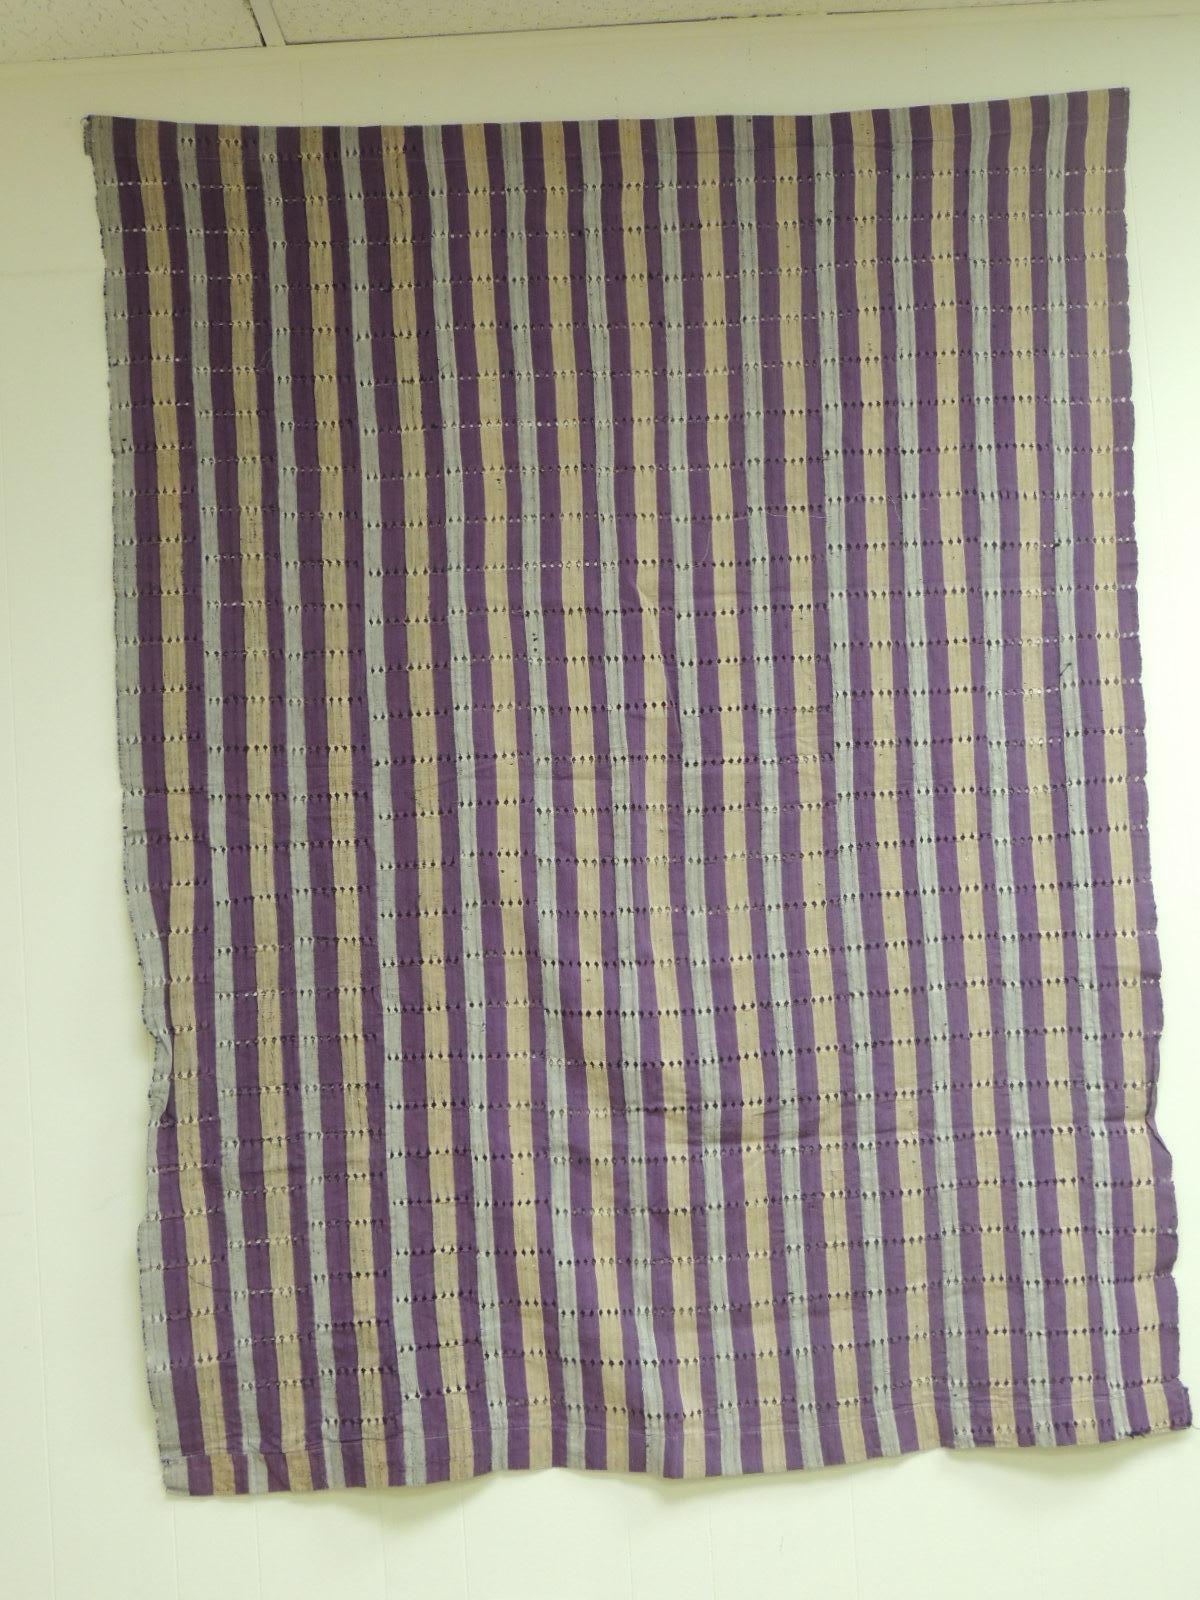 Large vintage Lilac and yellow stripe Yoruba African Textile.
The Yoruba are highly fashion-conscious people. Colors change from season to season and such non-traditional fibers as Lurex can be introduced
into strip woven cloth. A common form of